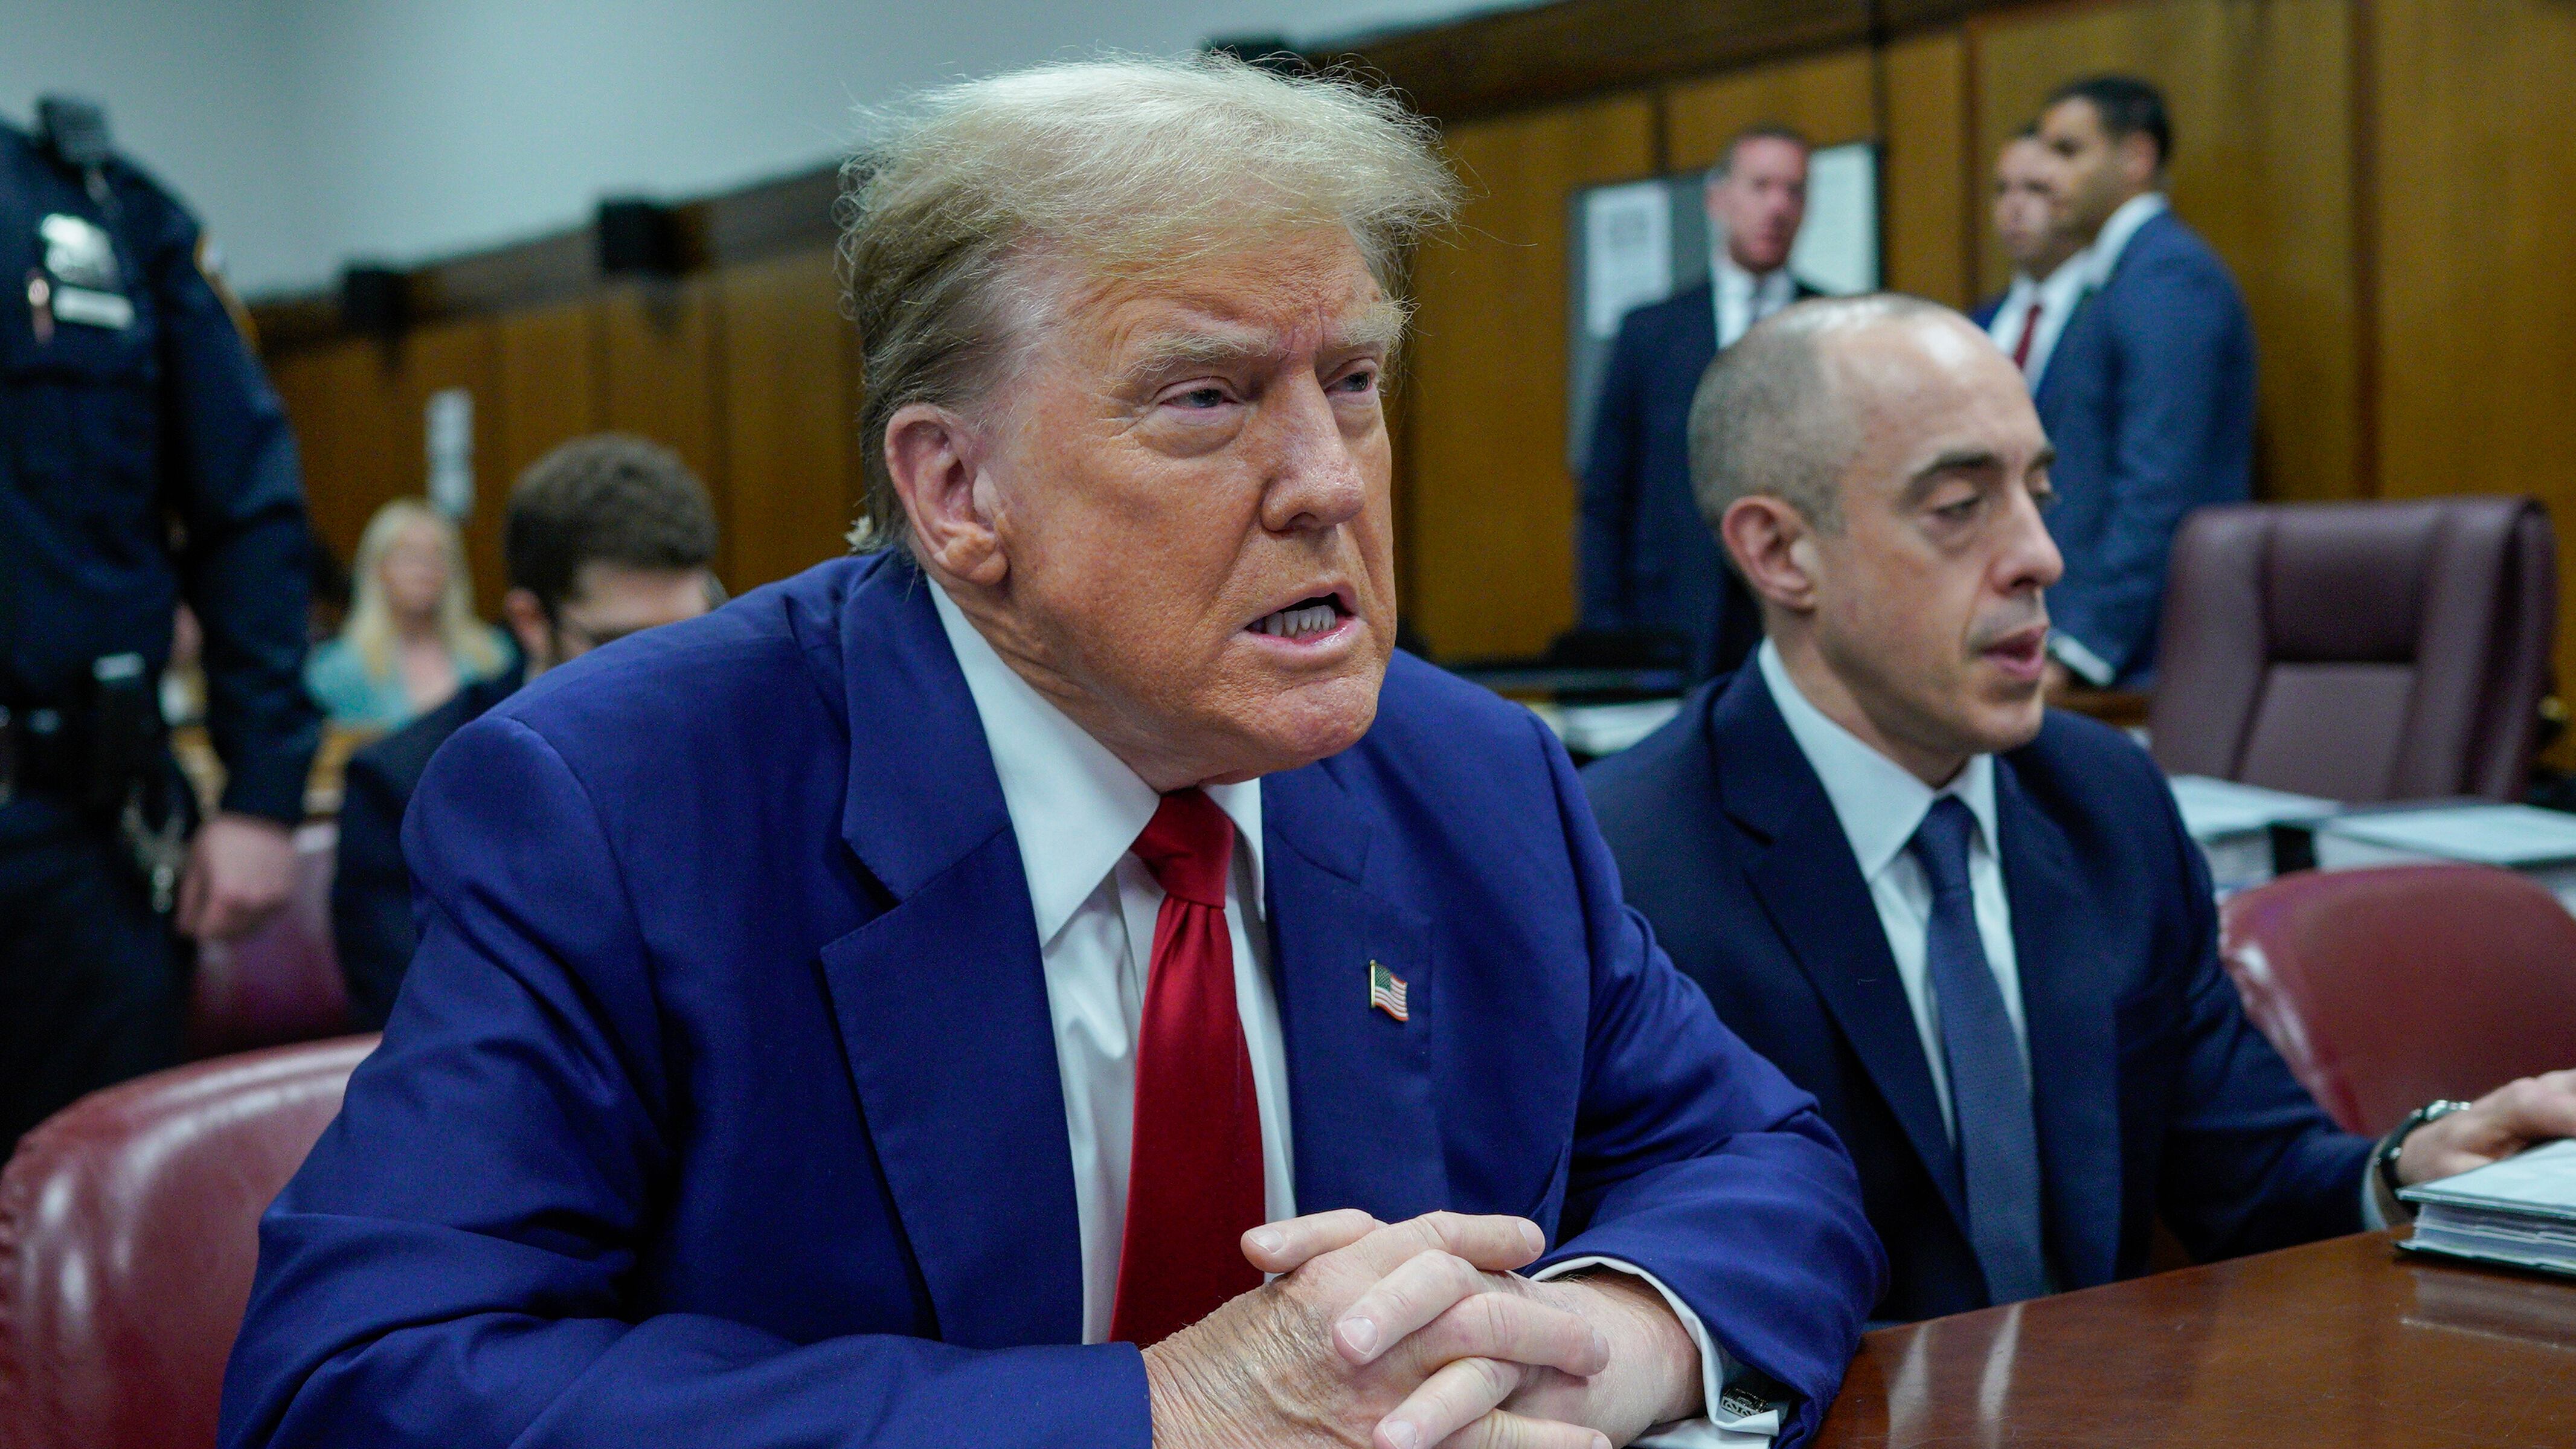 Former president Donald Trump was held in contempt and fined (Eduardo Munoz/Pool Photo via AP)